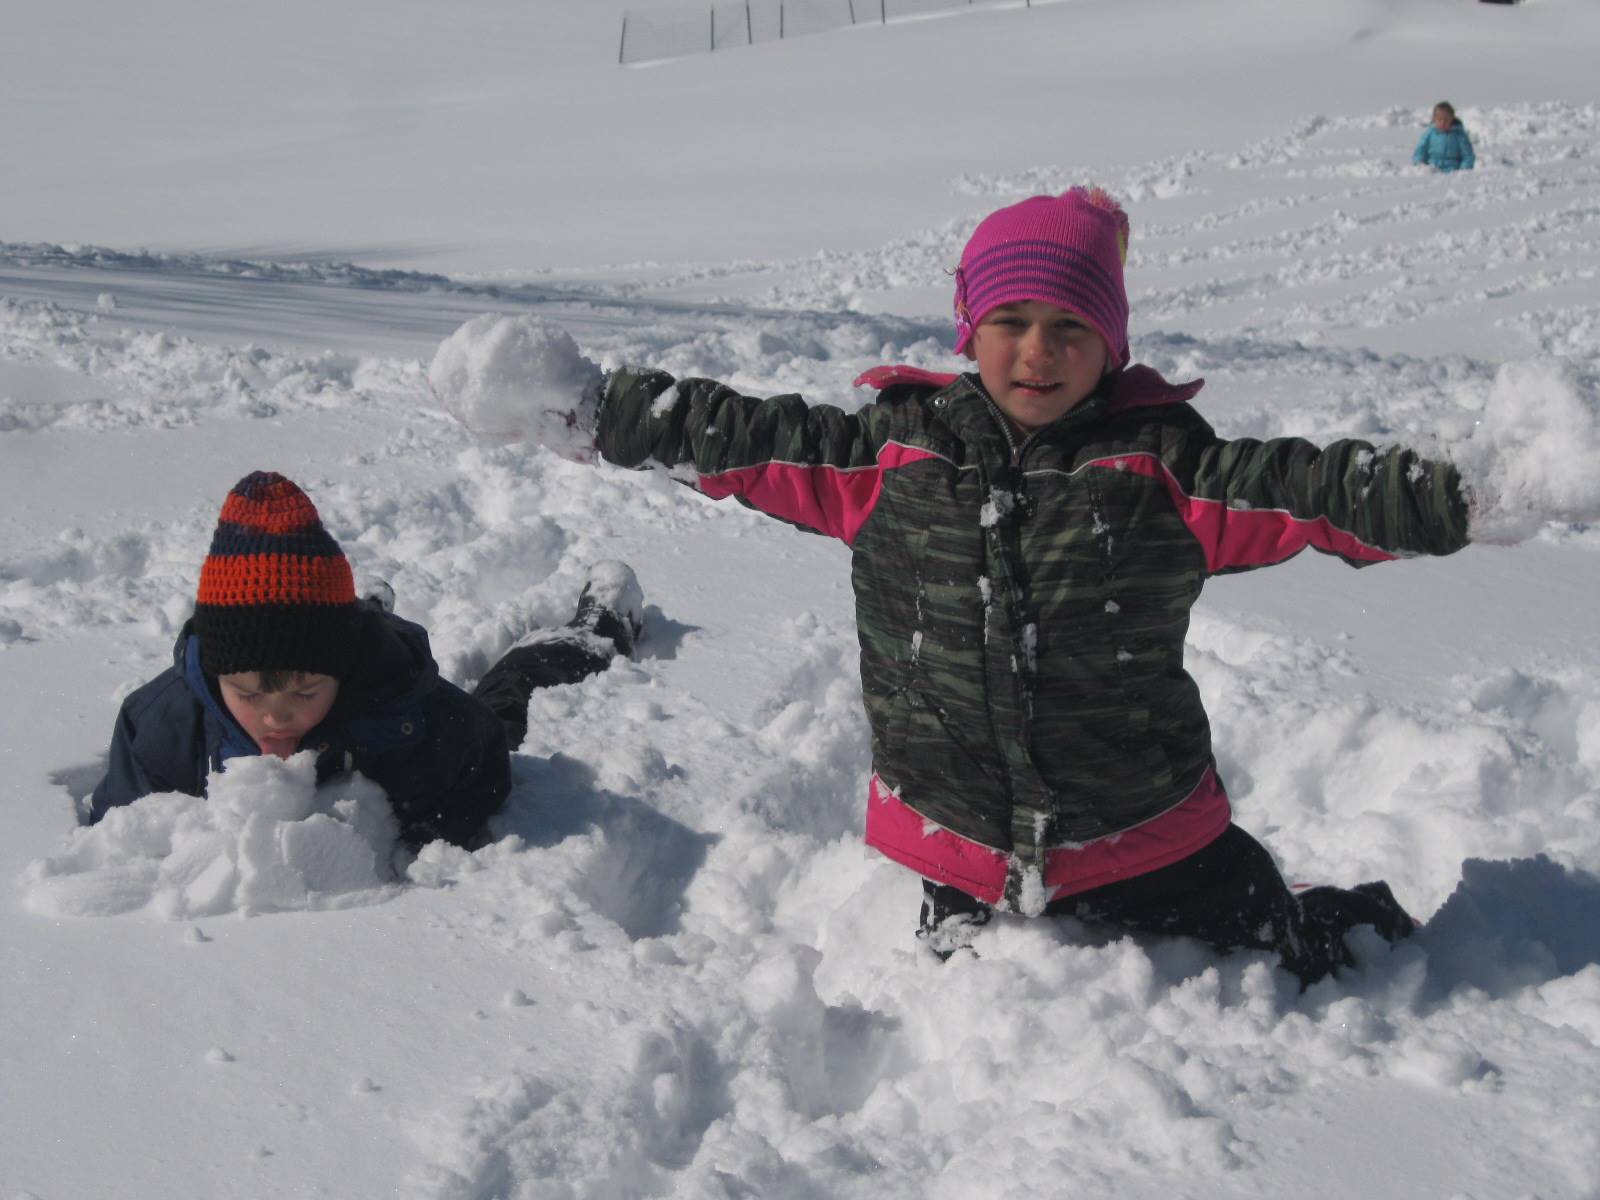 Children throwing and tasting snow.